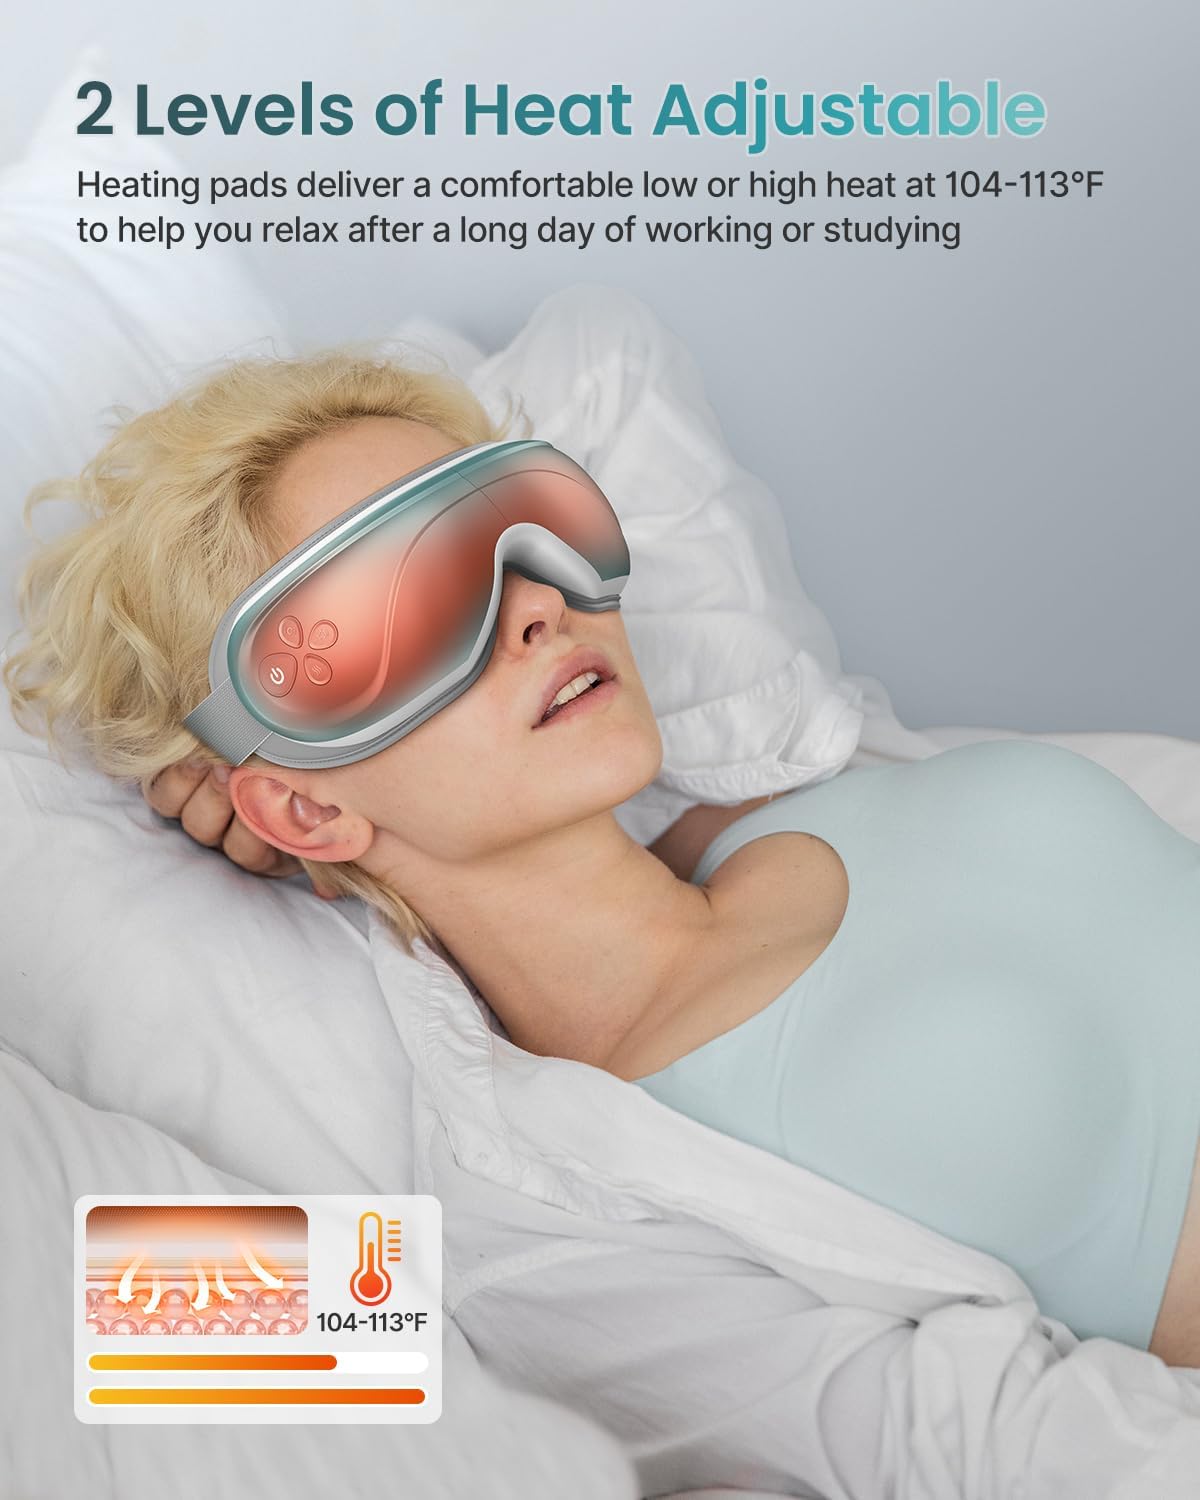 RENPHO FSA/HSA Eligible Eye Massager Eyeris 2 -Eye Massager with Heat for Migraines Relief, Heated Eye Mask, Eye Care, Face Massager for Eye Strain Eye Bags Dry Eyes, Improve Sleep, Birthday Gift